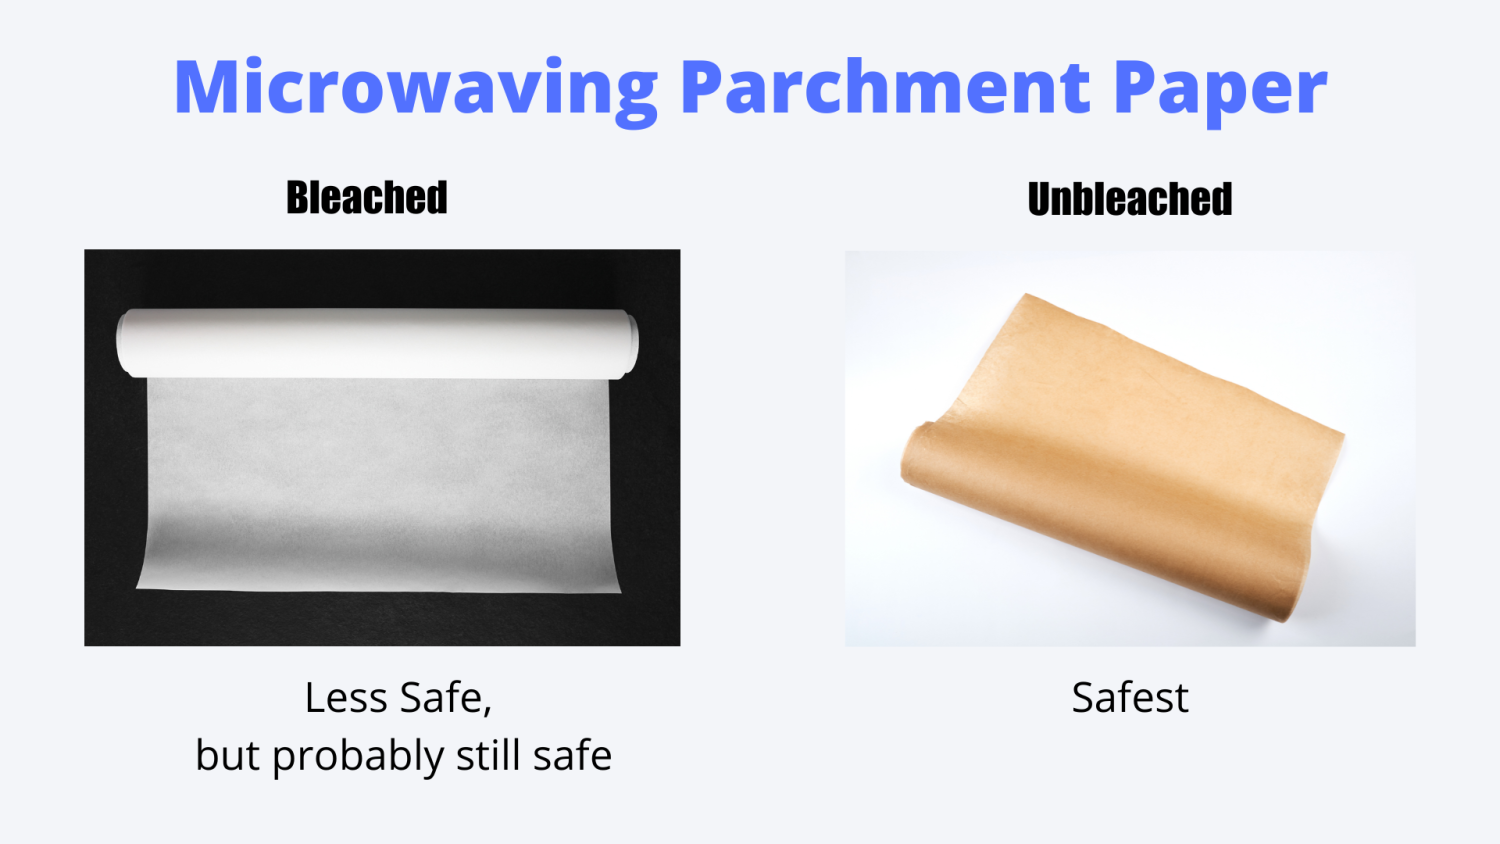 microwaving parchment paper infographic